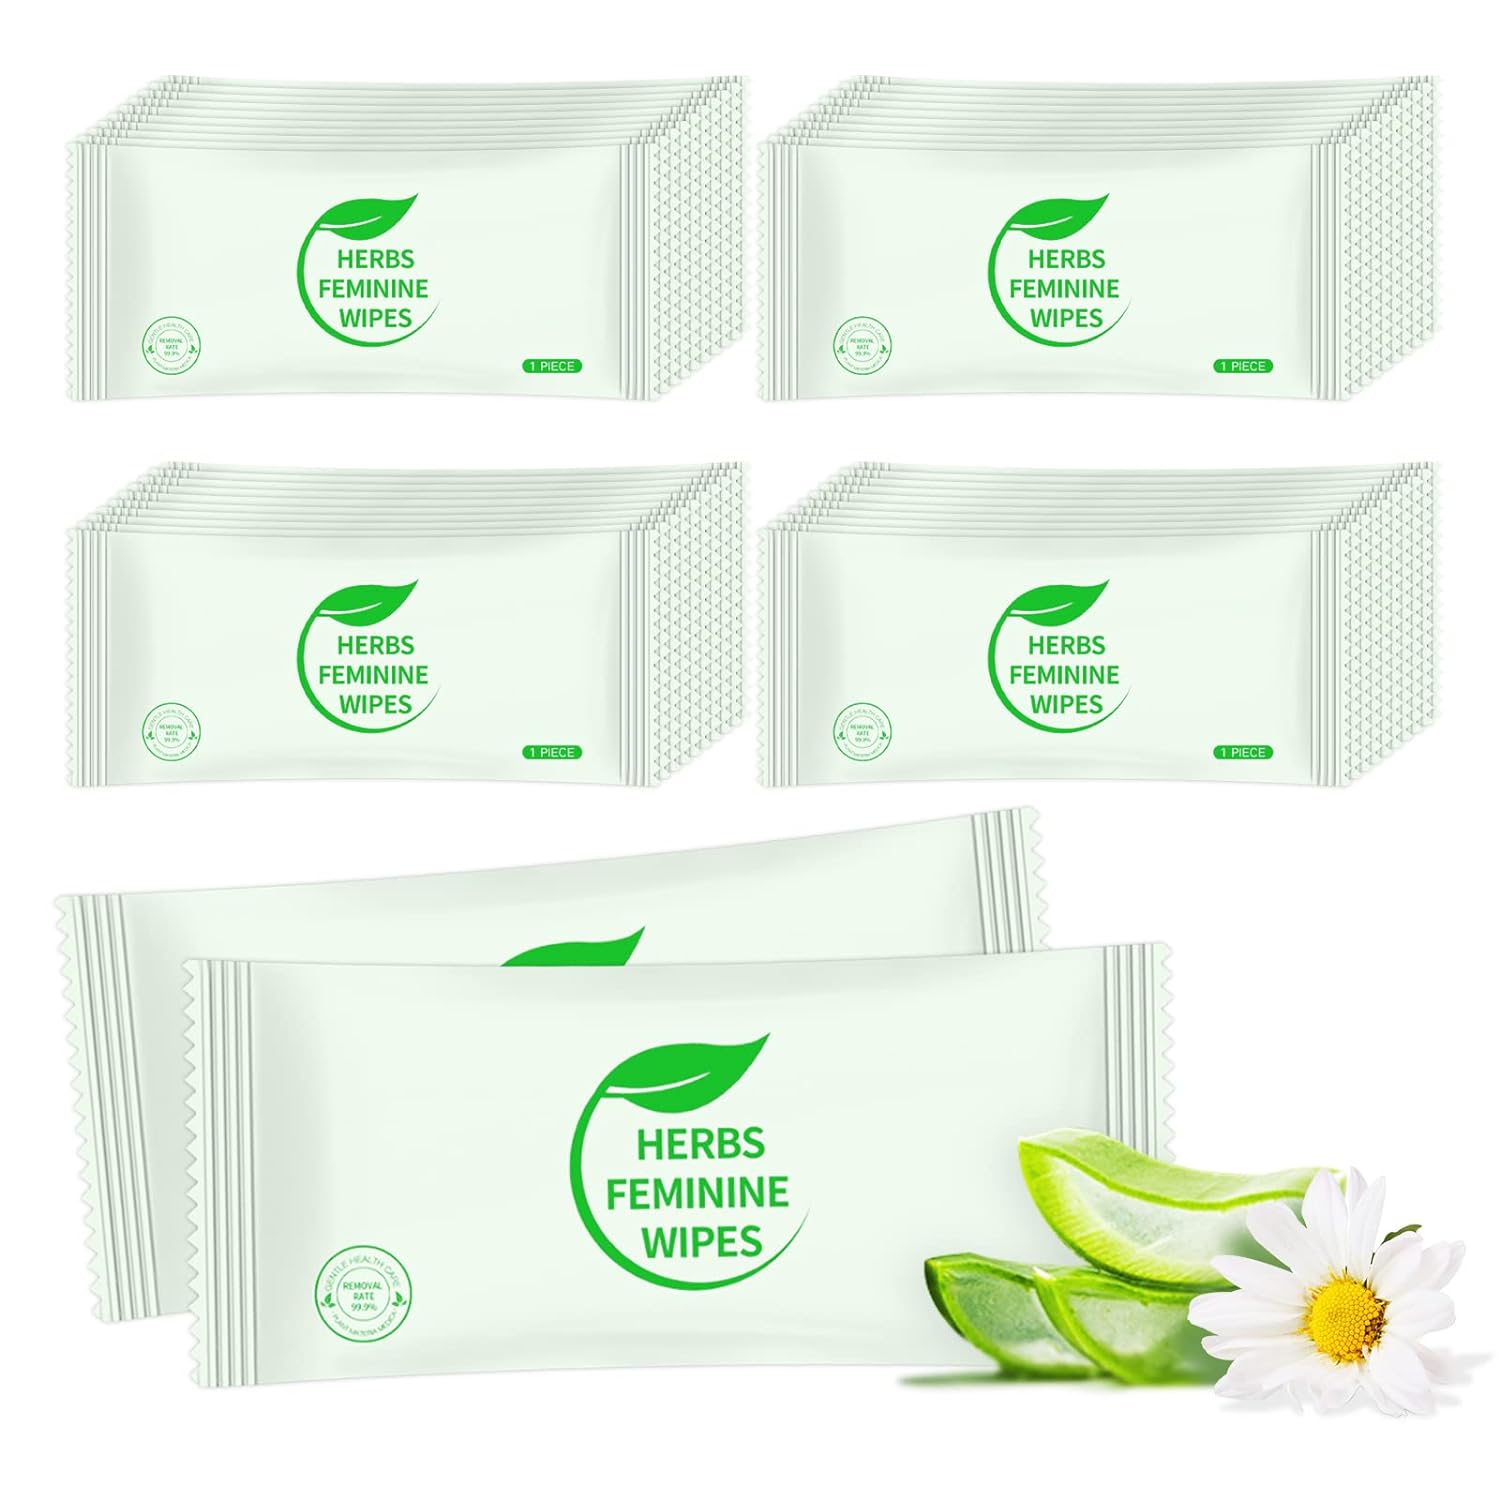 Individually Wrapped Personal Hygiene Wipes,100 Pack Feminine Wipes Travel,Plant Extracts,Travel Essential Easy to Carry,Hygiene Wipes for Women to Give Loved Ones Friends Homeless People,Large